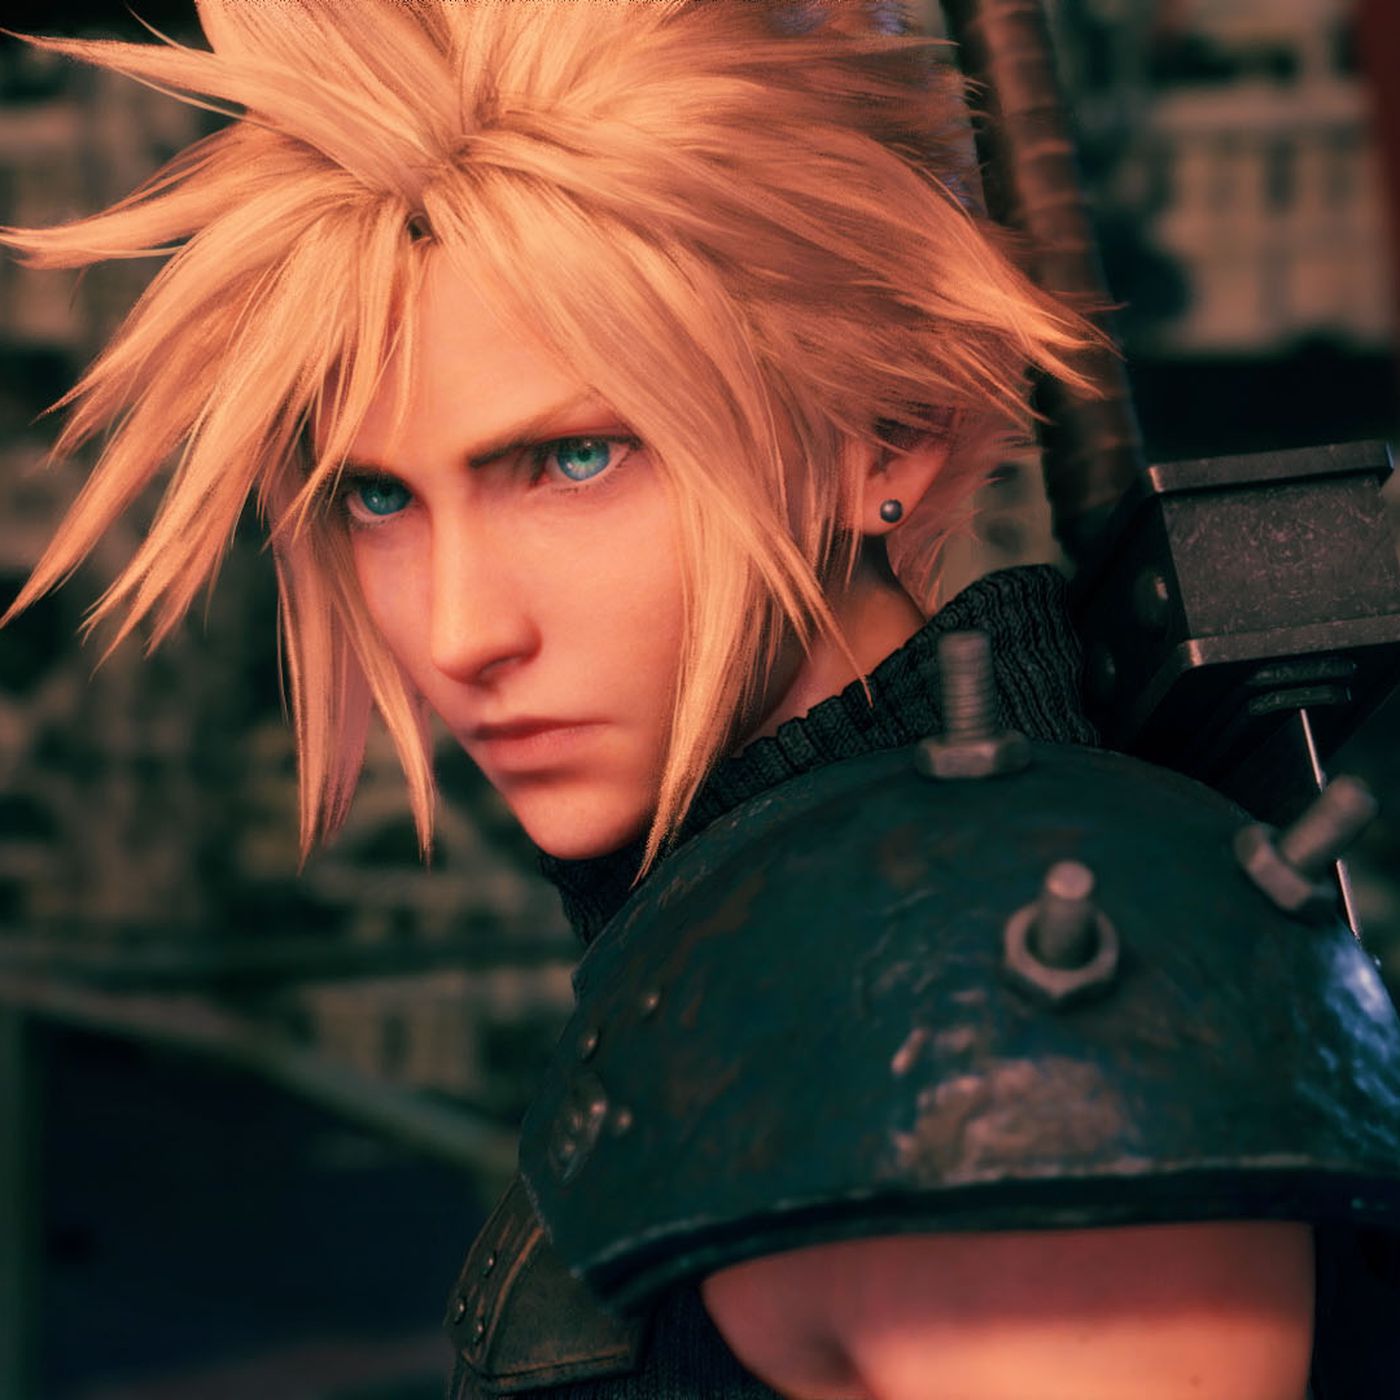 Why Final Fantasy VII Remake is my game of the year